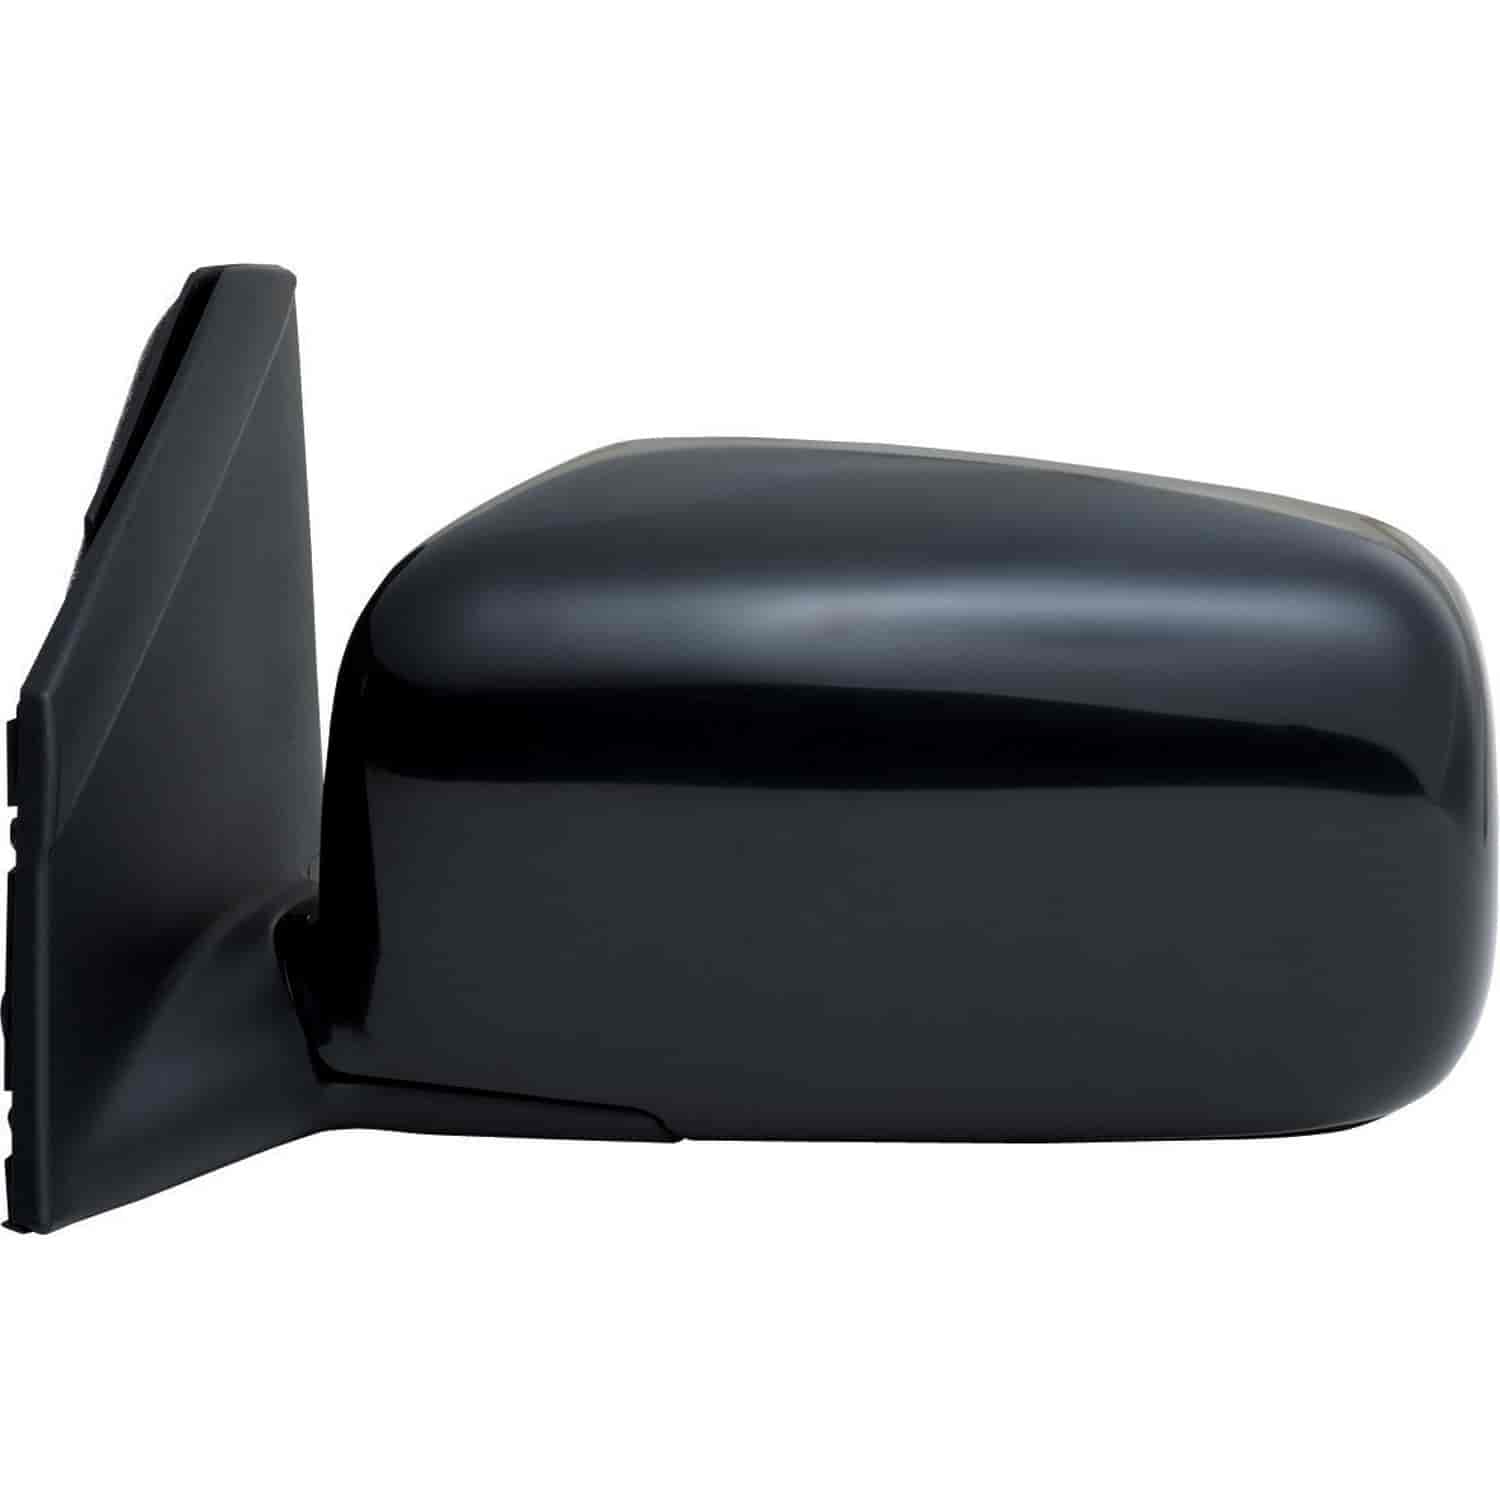 OEM Style Replacement mirror for 02-07 Mitsubishi Lancer driver side mirror tested to fit and functi